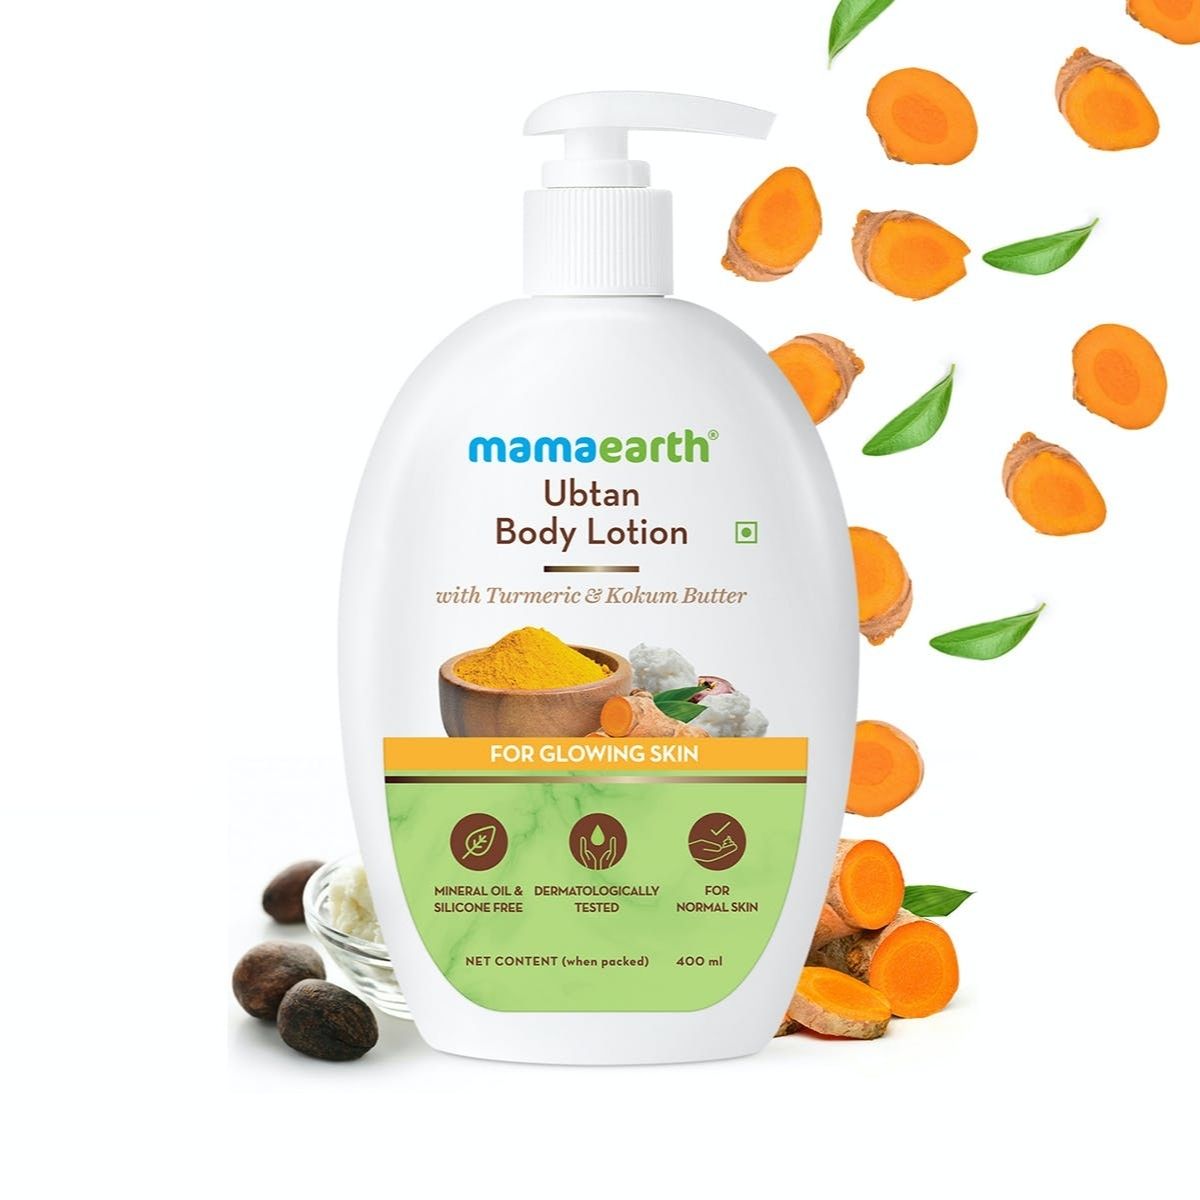 Mamaearth Ubtan Body Lotion With Turmeric & Kokum Butter For Glowing Skin - 400ml